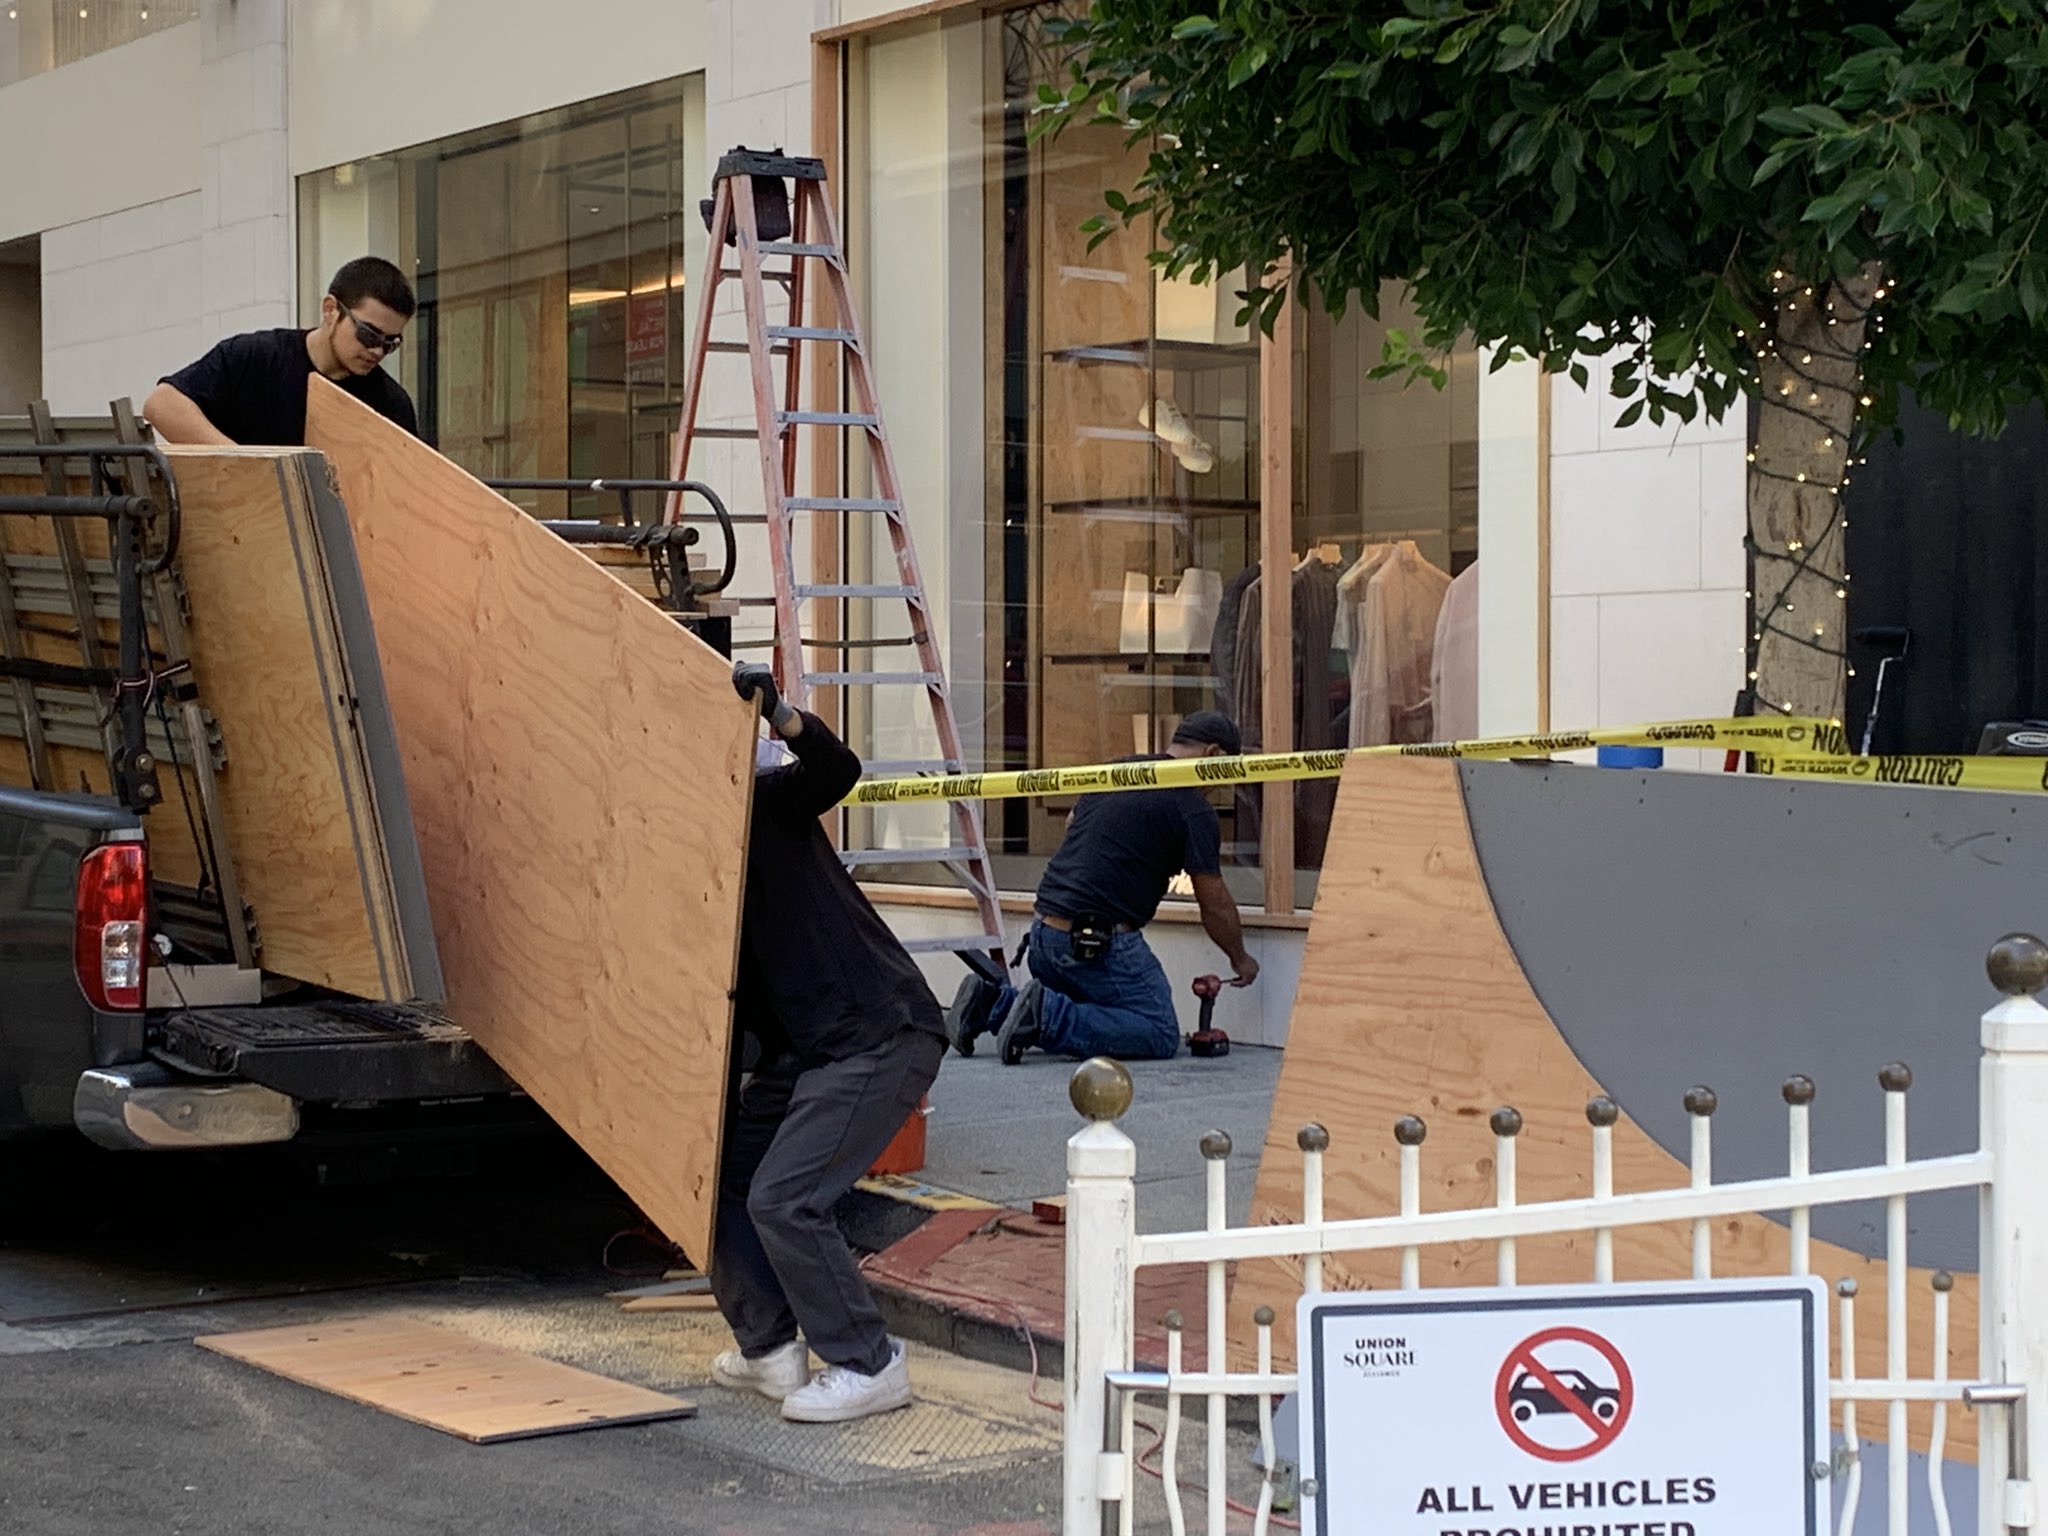 Thieves 'emptied out' SF's Union Square Louis Vuitton store